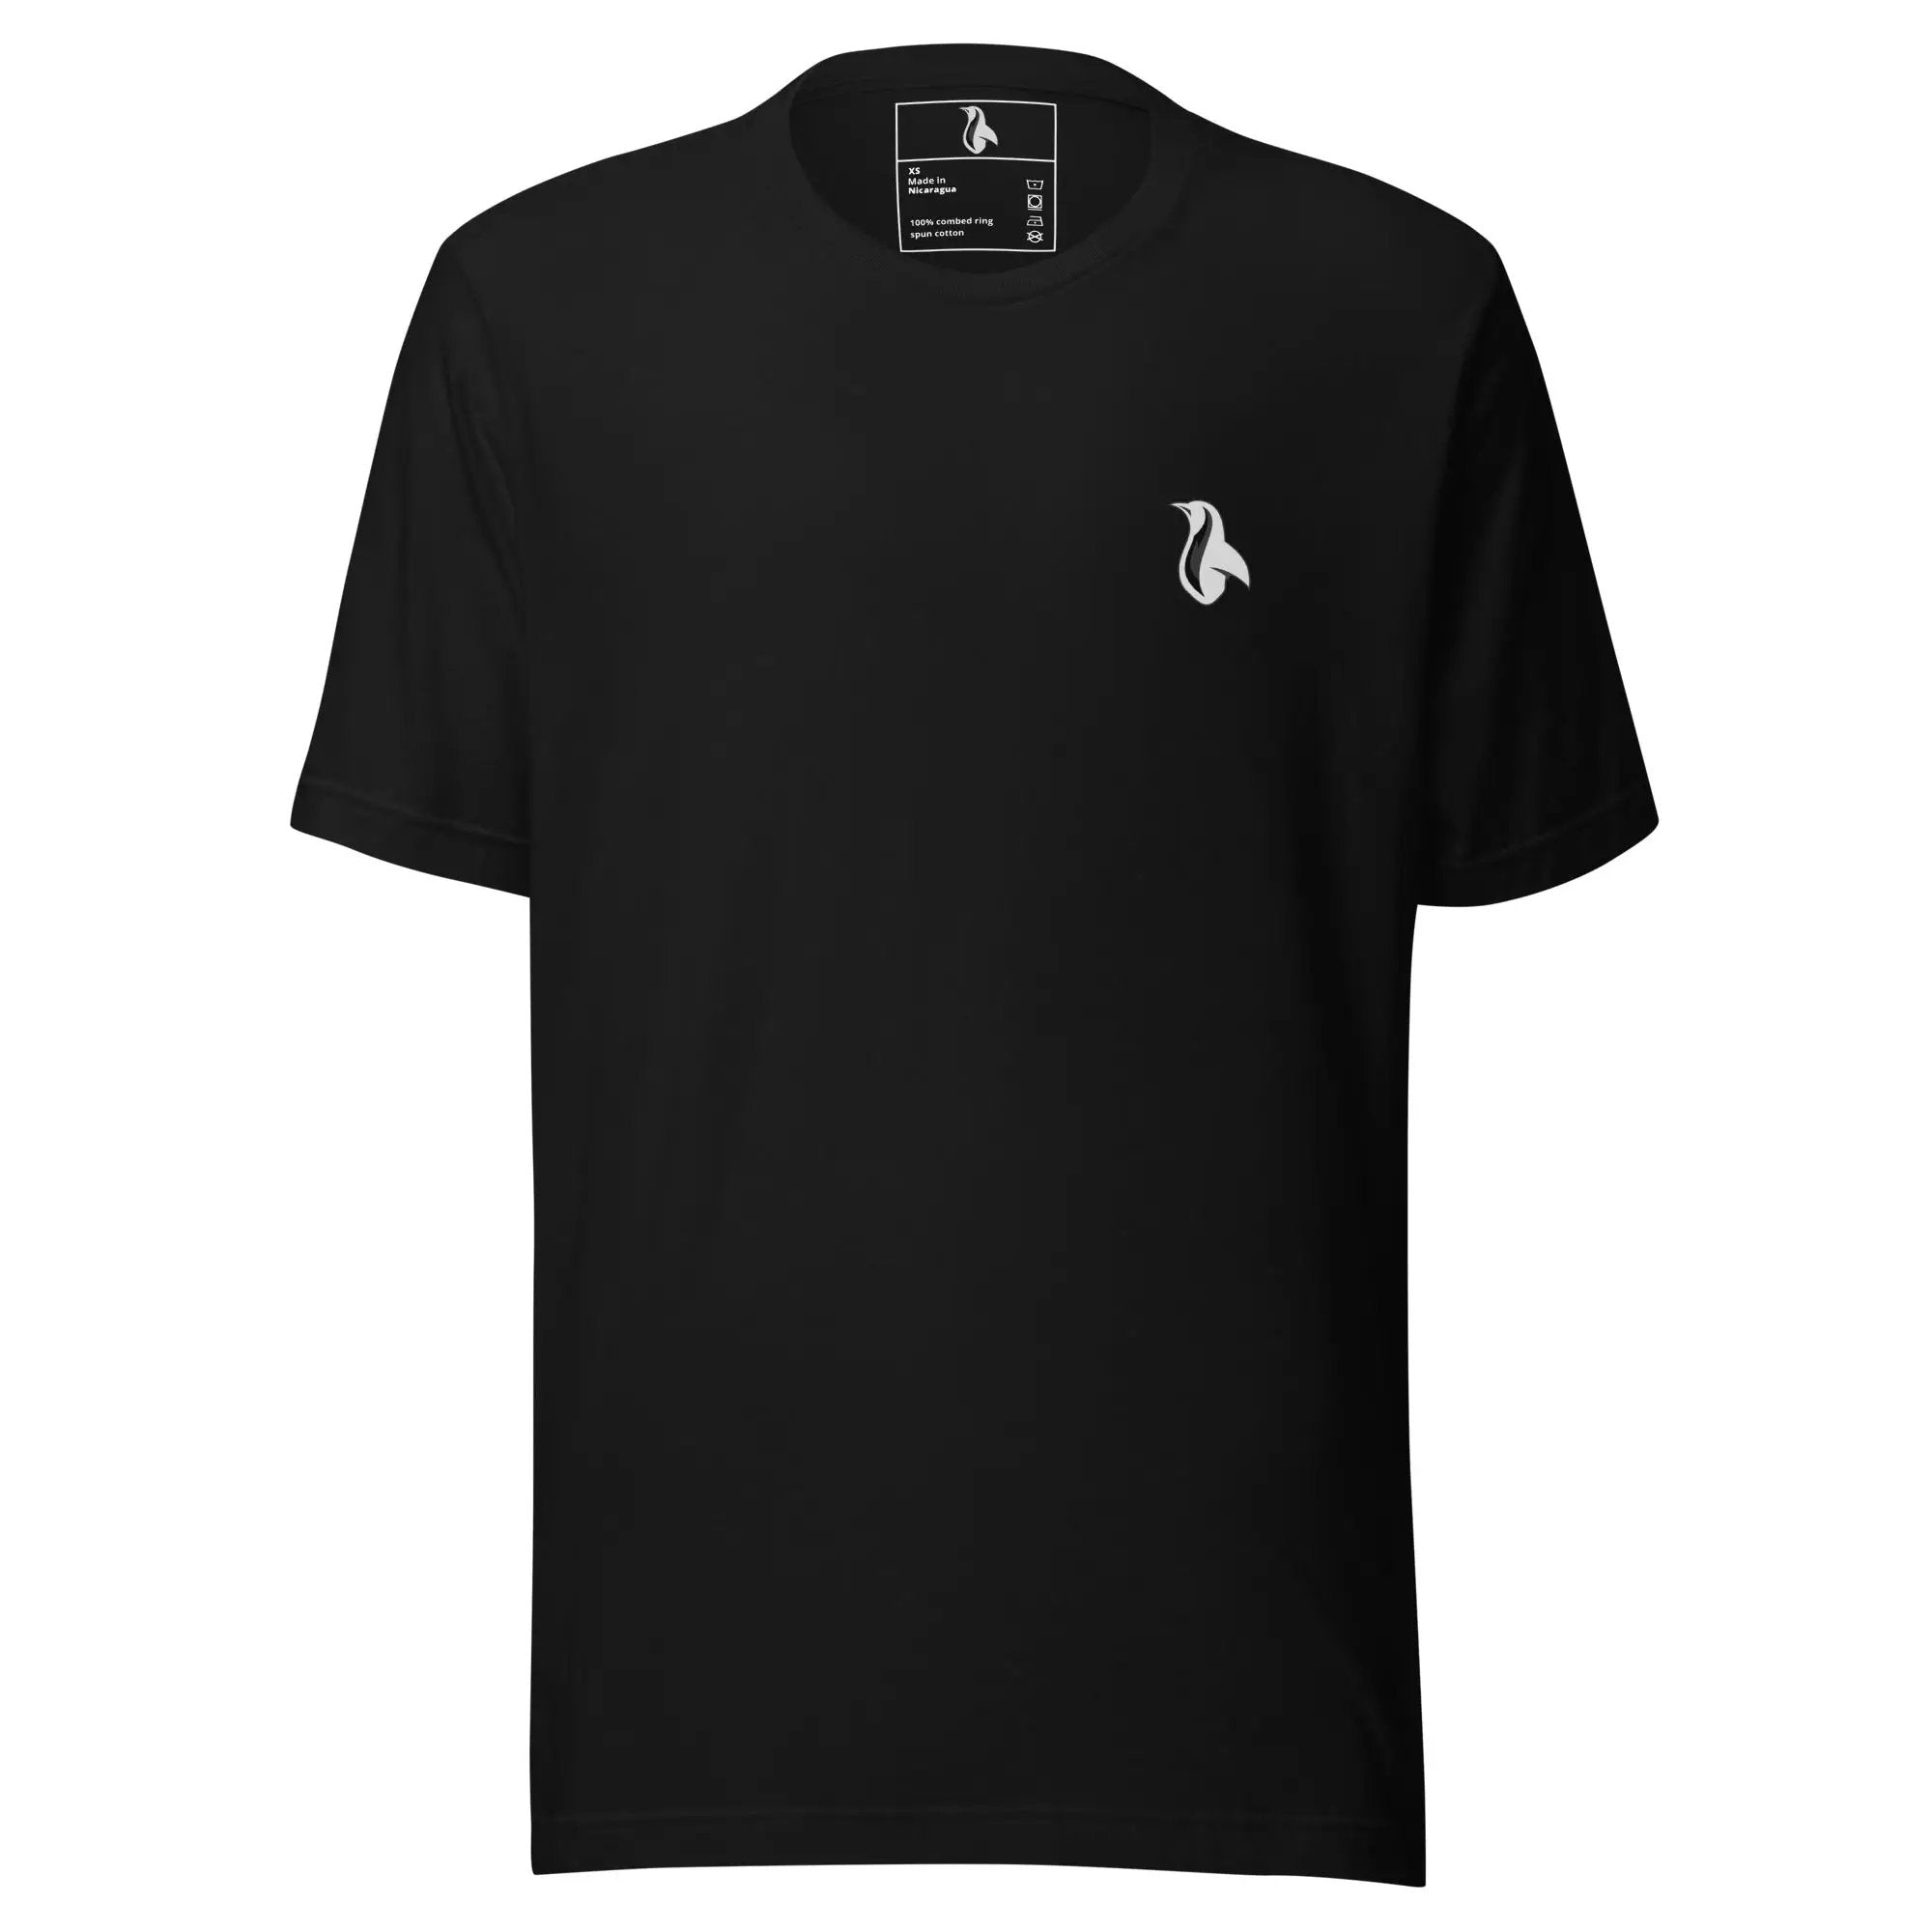 a black t - shirt with a white logo on the chest